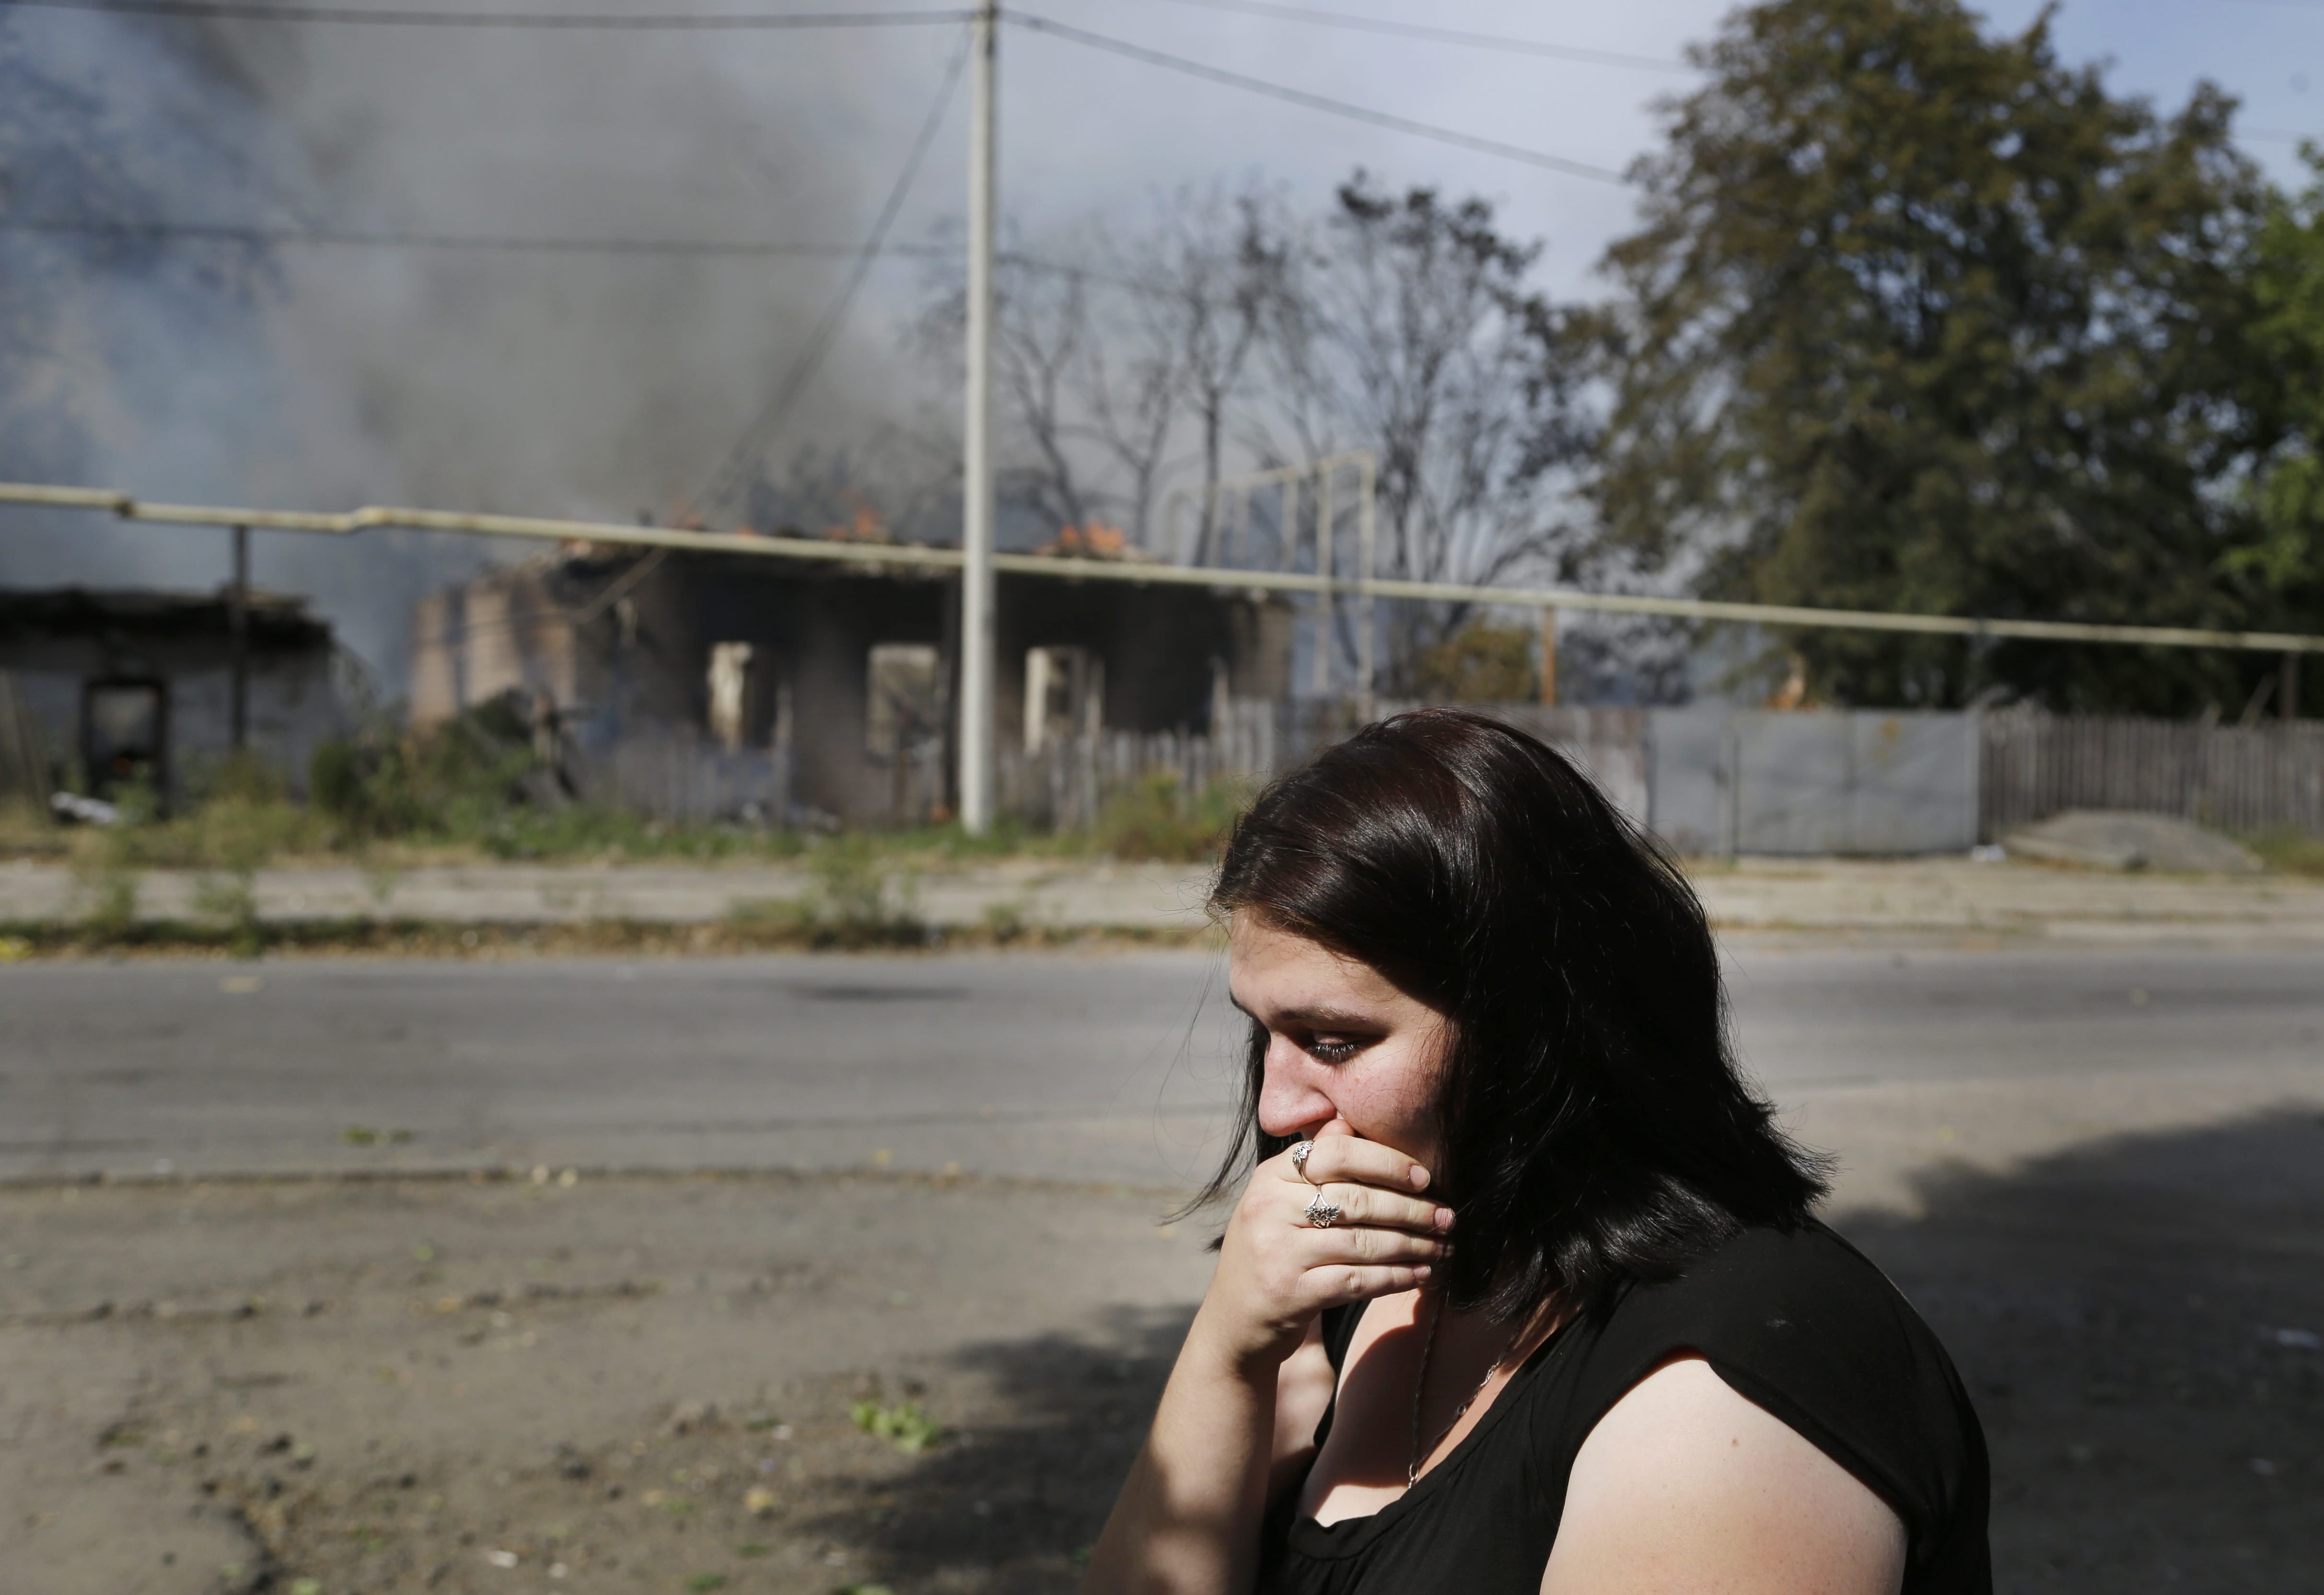 A local woman cries Sunday in front of her burning house after shelling in Donetsk, Ukraine.